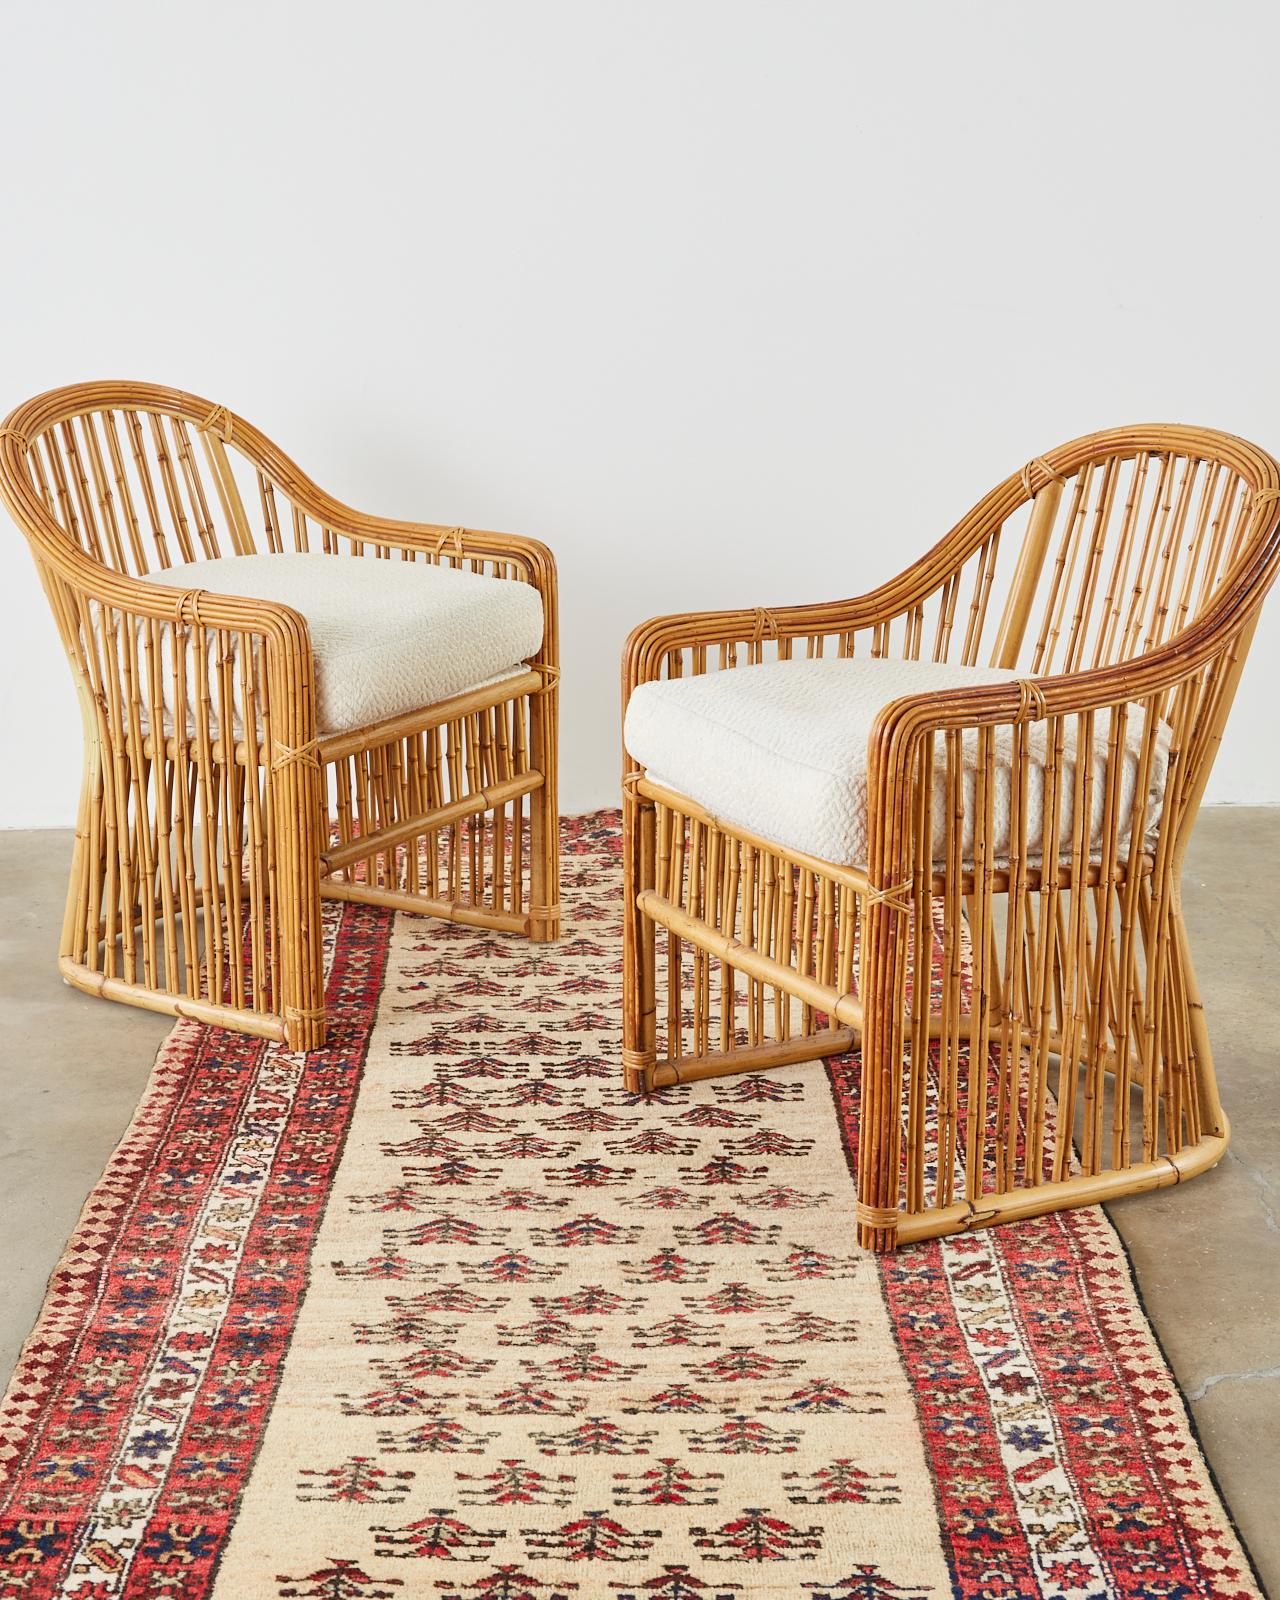 Fantastic set of ten bamboo rattan dining chairs made by Randolph and Hein for Michael Taylor interiors. The chairs feature a classic barrel shaped frame crafted from bamboo poles and reinforced with smaller reeds. The arms gracefully curve around